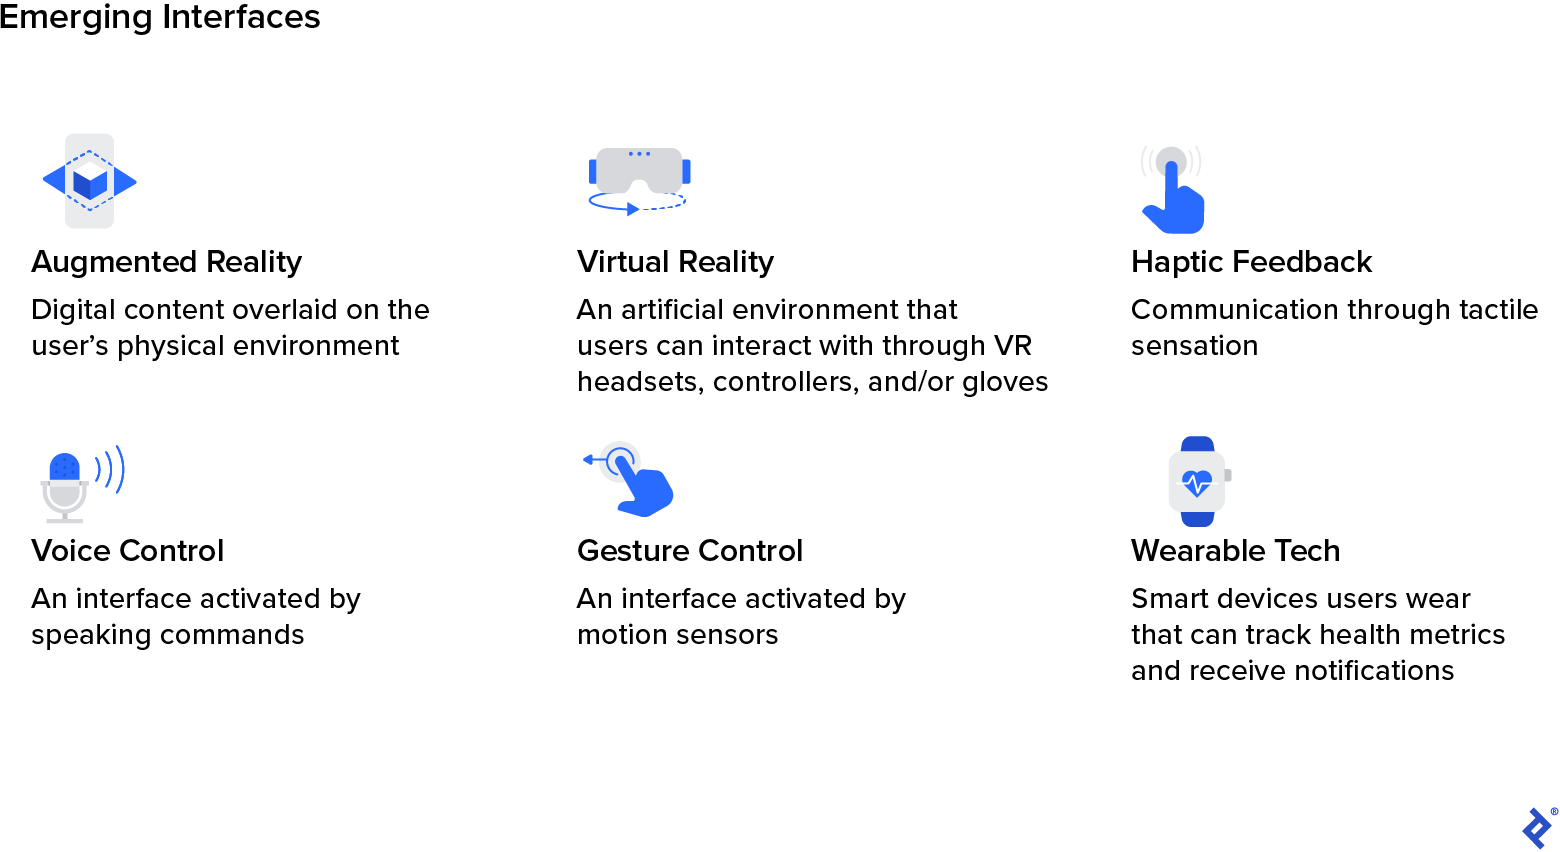 Future UI design will focus on emerging interfaces like augmented reality, virtual reality, haptic feedback, voice control, gesture control, and wearable tech.